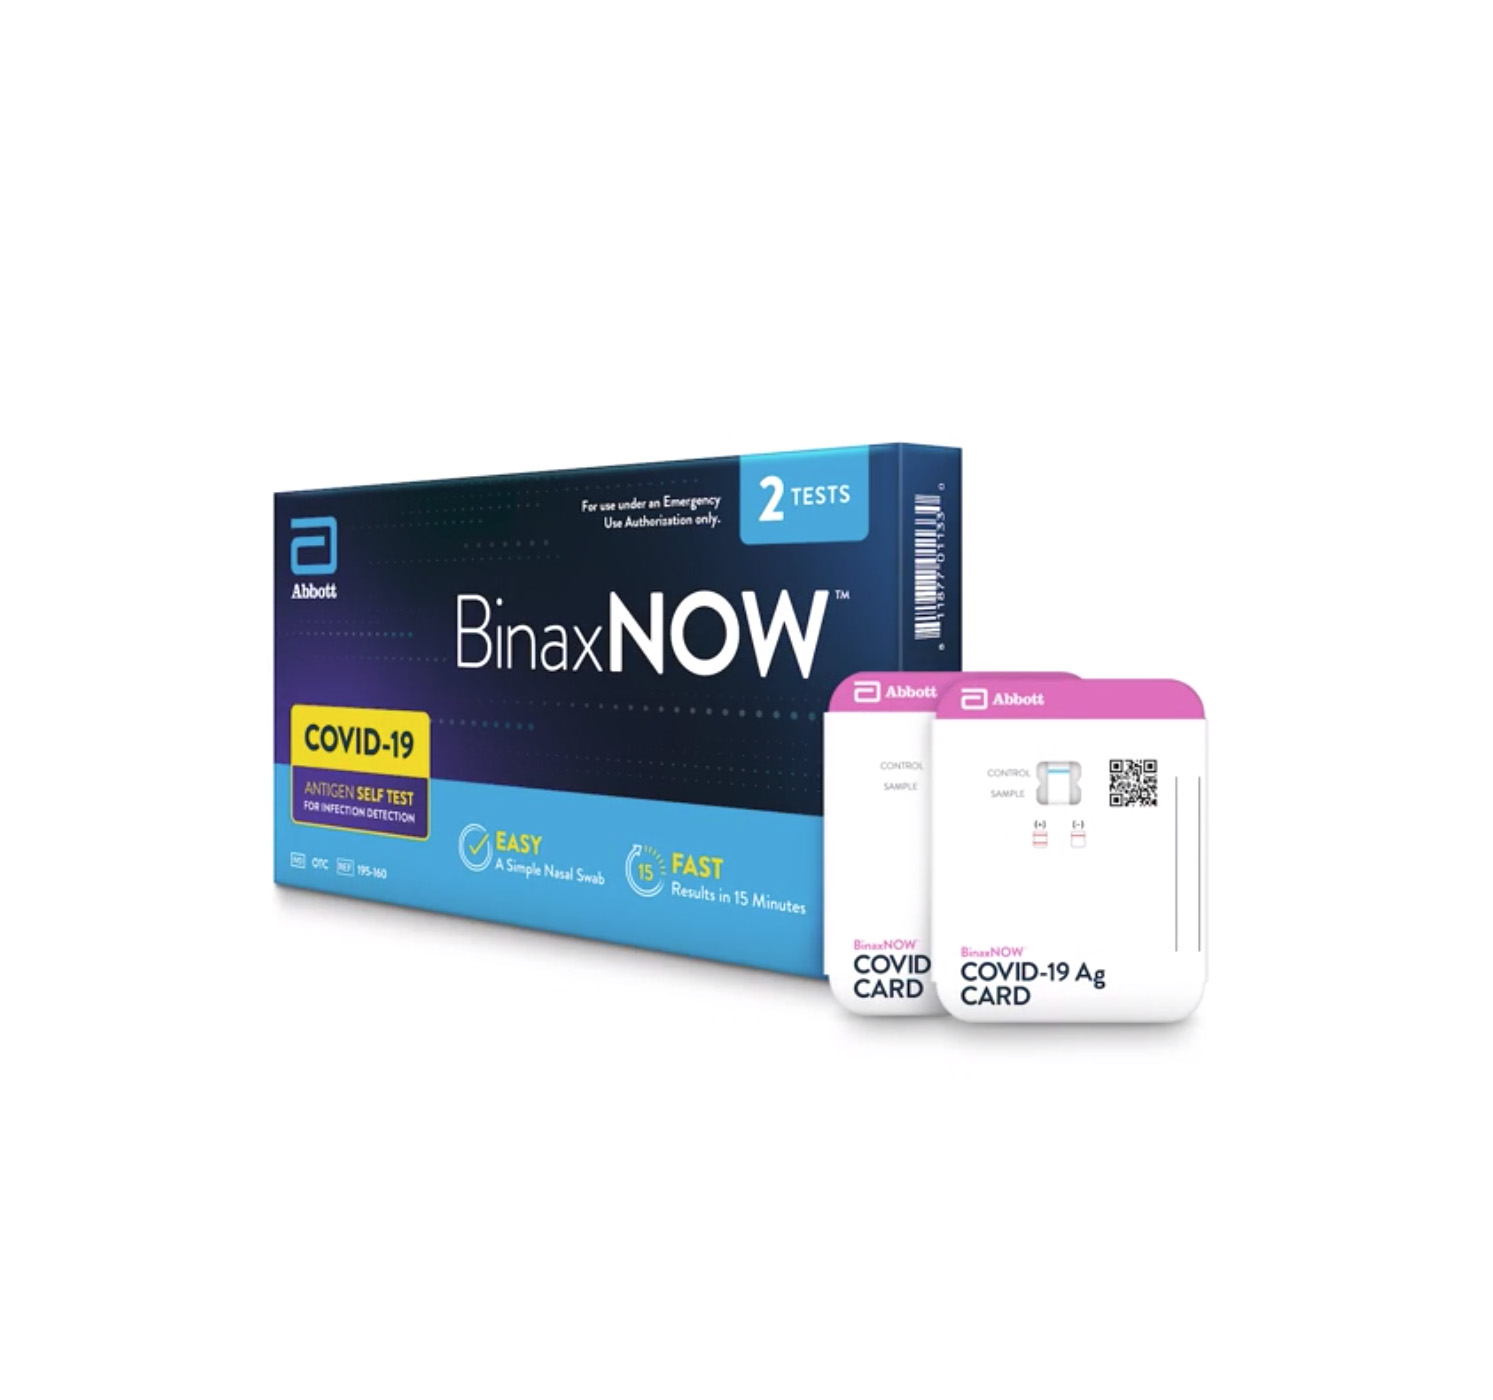 PHOTO: The FDA approved BinaxNOW Self Test will be sold in 2-count packs for an MSRP of $23.99, making it the most affordable over-the-counter (OTC) COVID-19 rapid test available in the U.S.